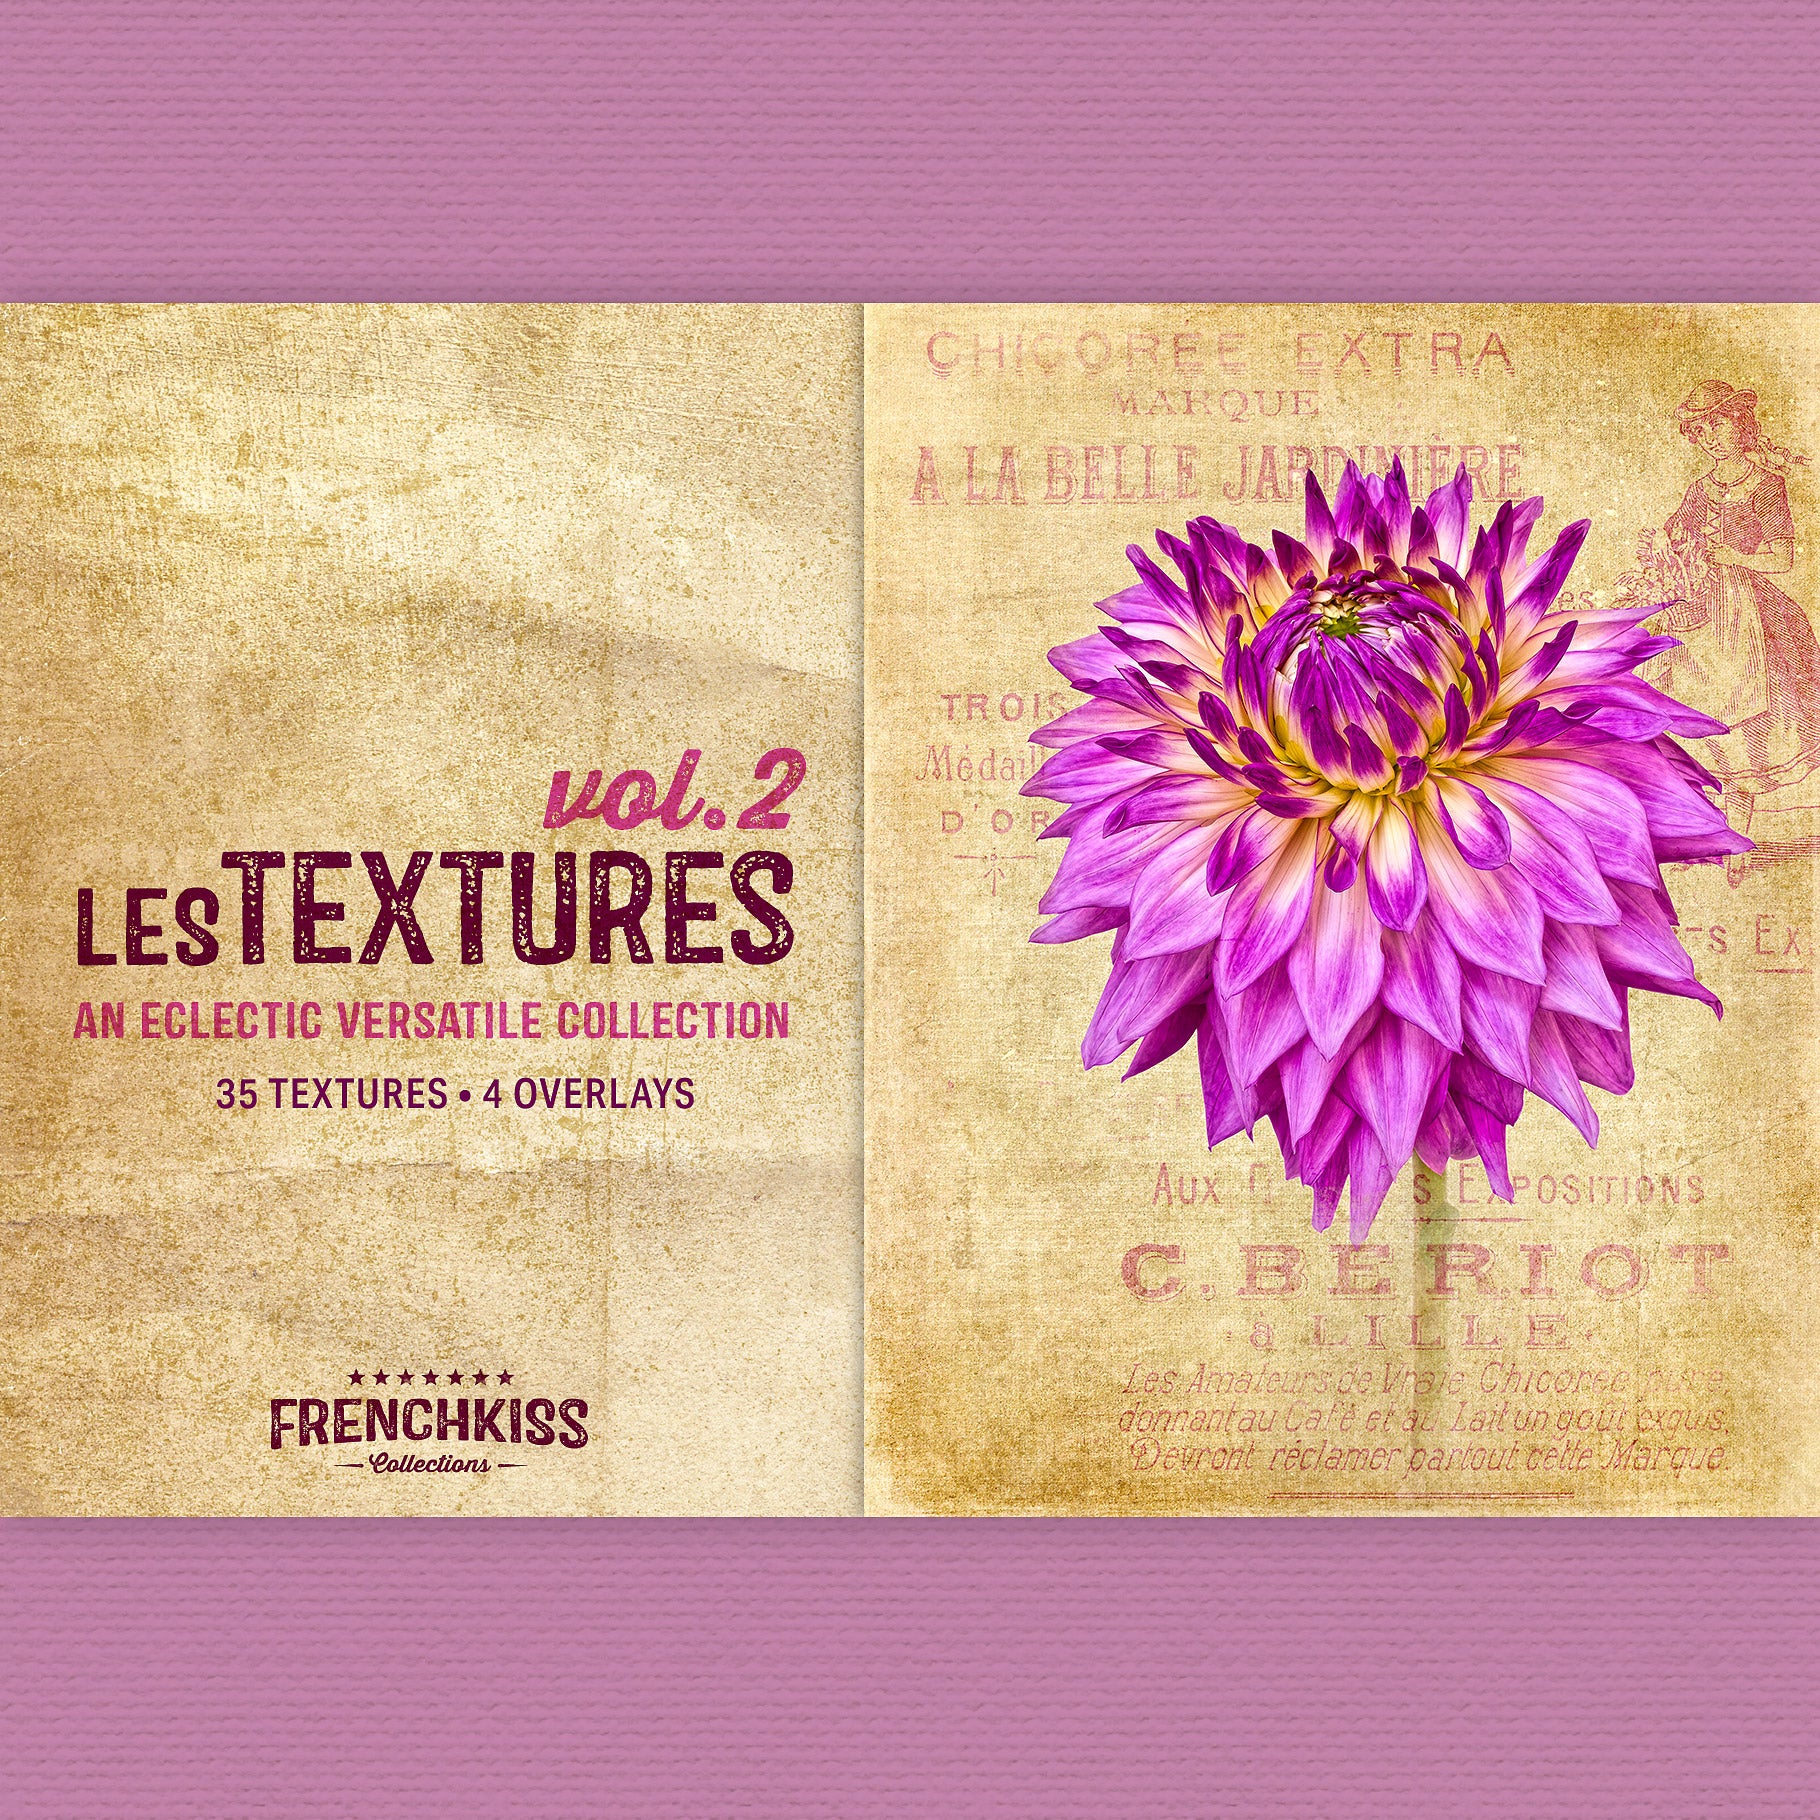 Les Textures Volume 2 fine art and grunge texture collection.